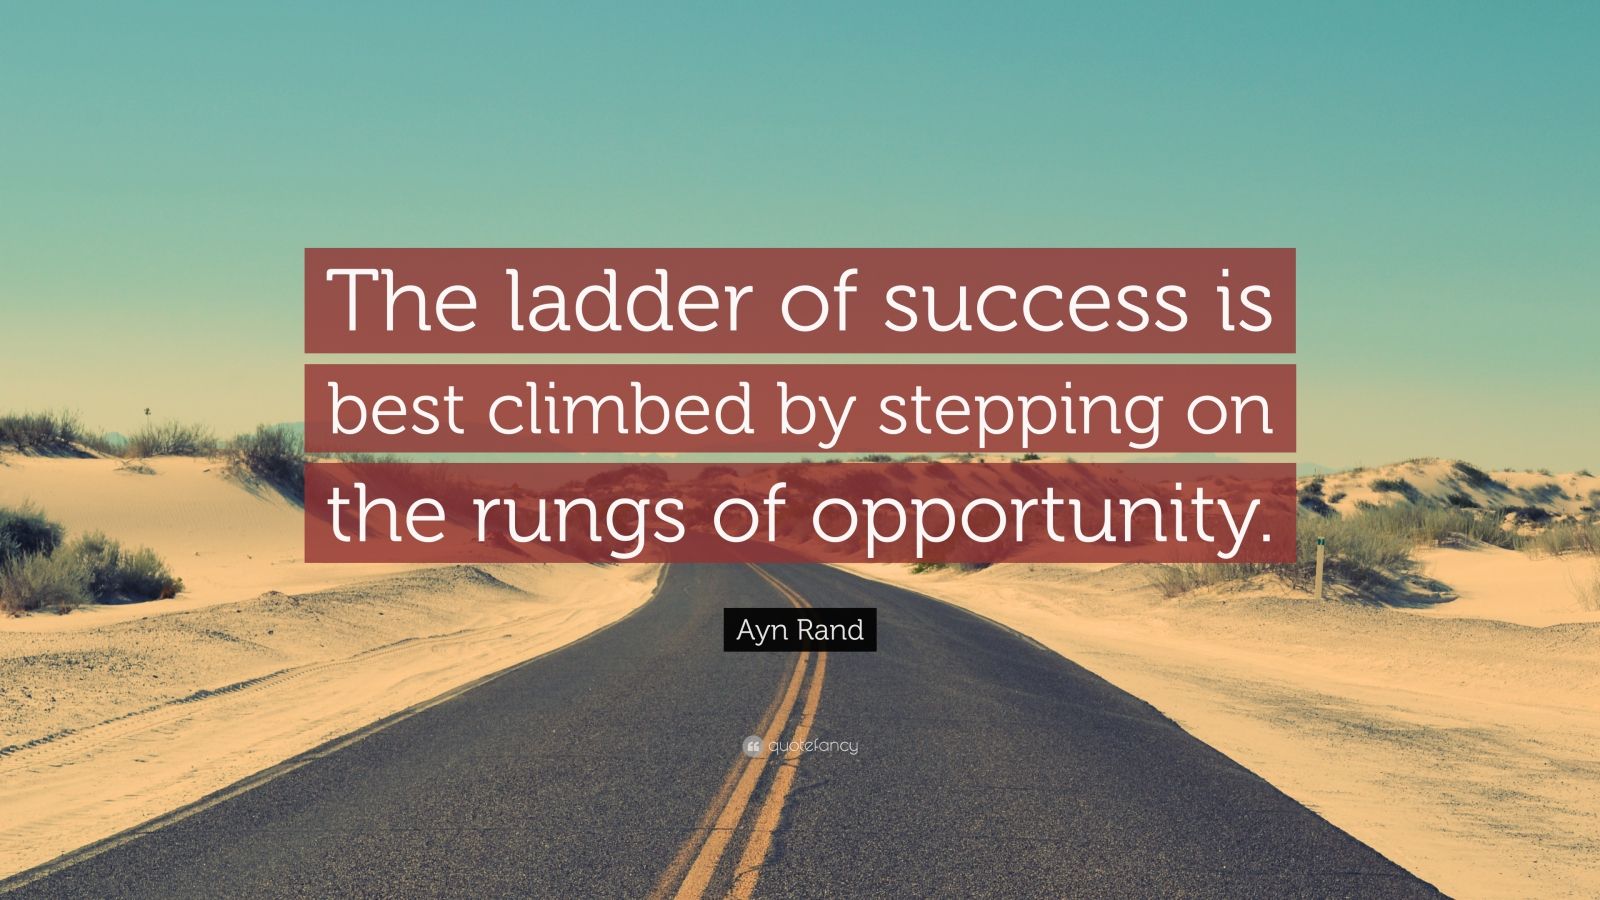 Ayn Rand Quote: “The ladder of success is best climbed by stepping on ...